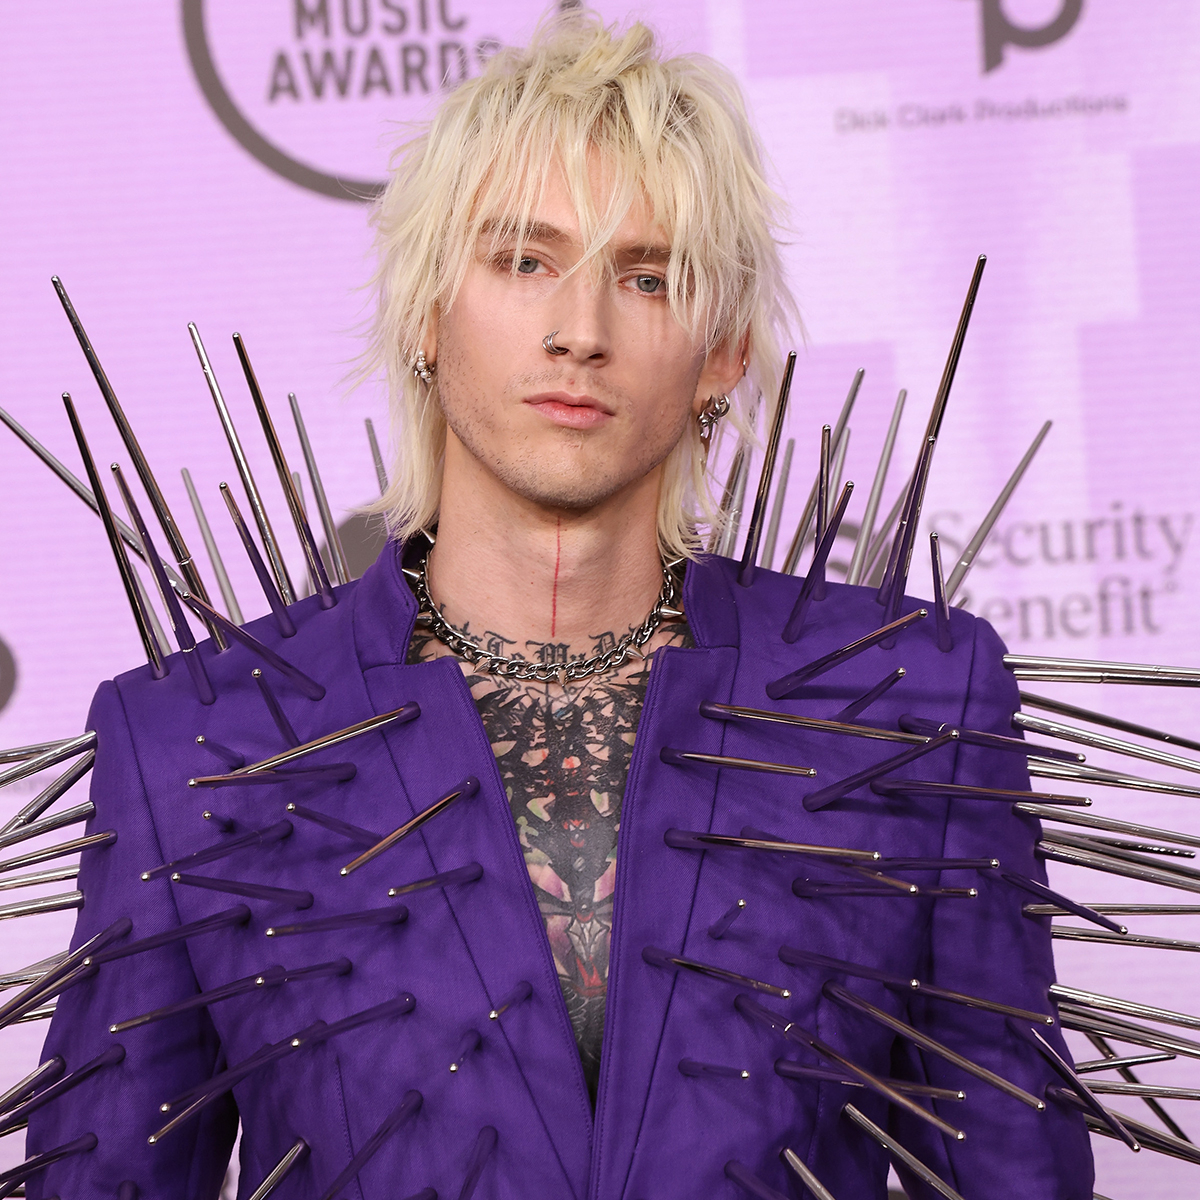 Machine Gun Kelly Claps Back at Critics of His Style